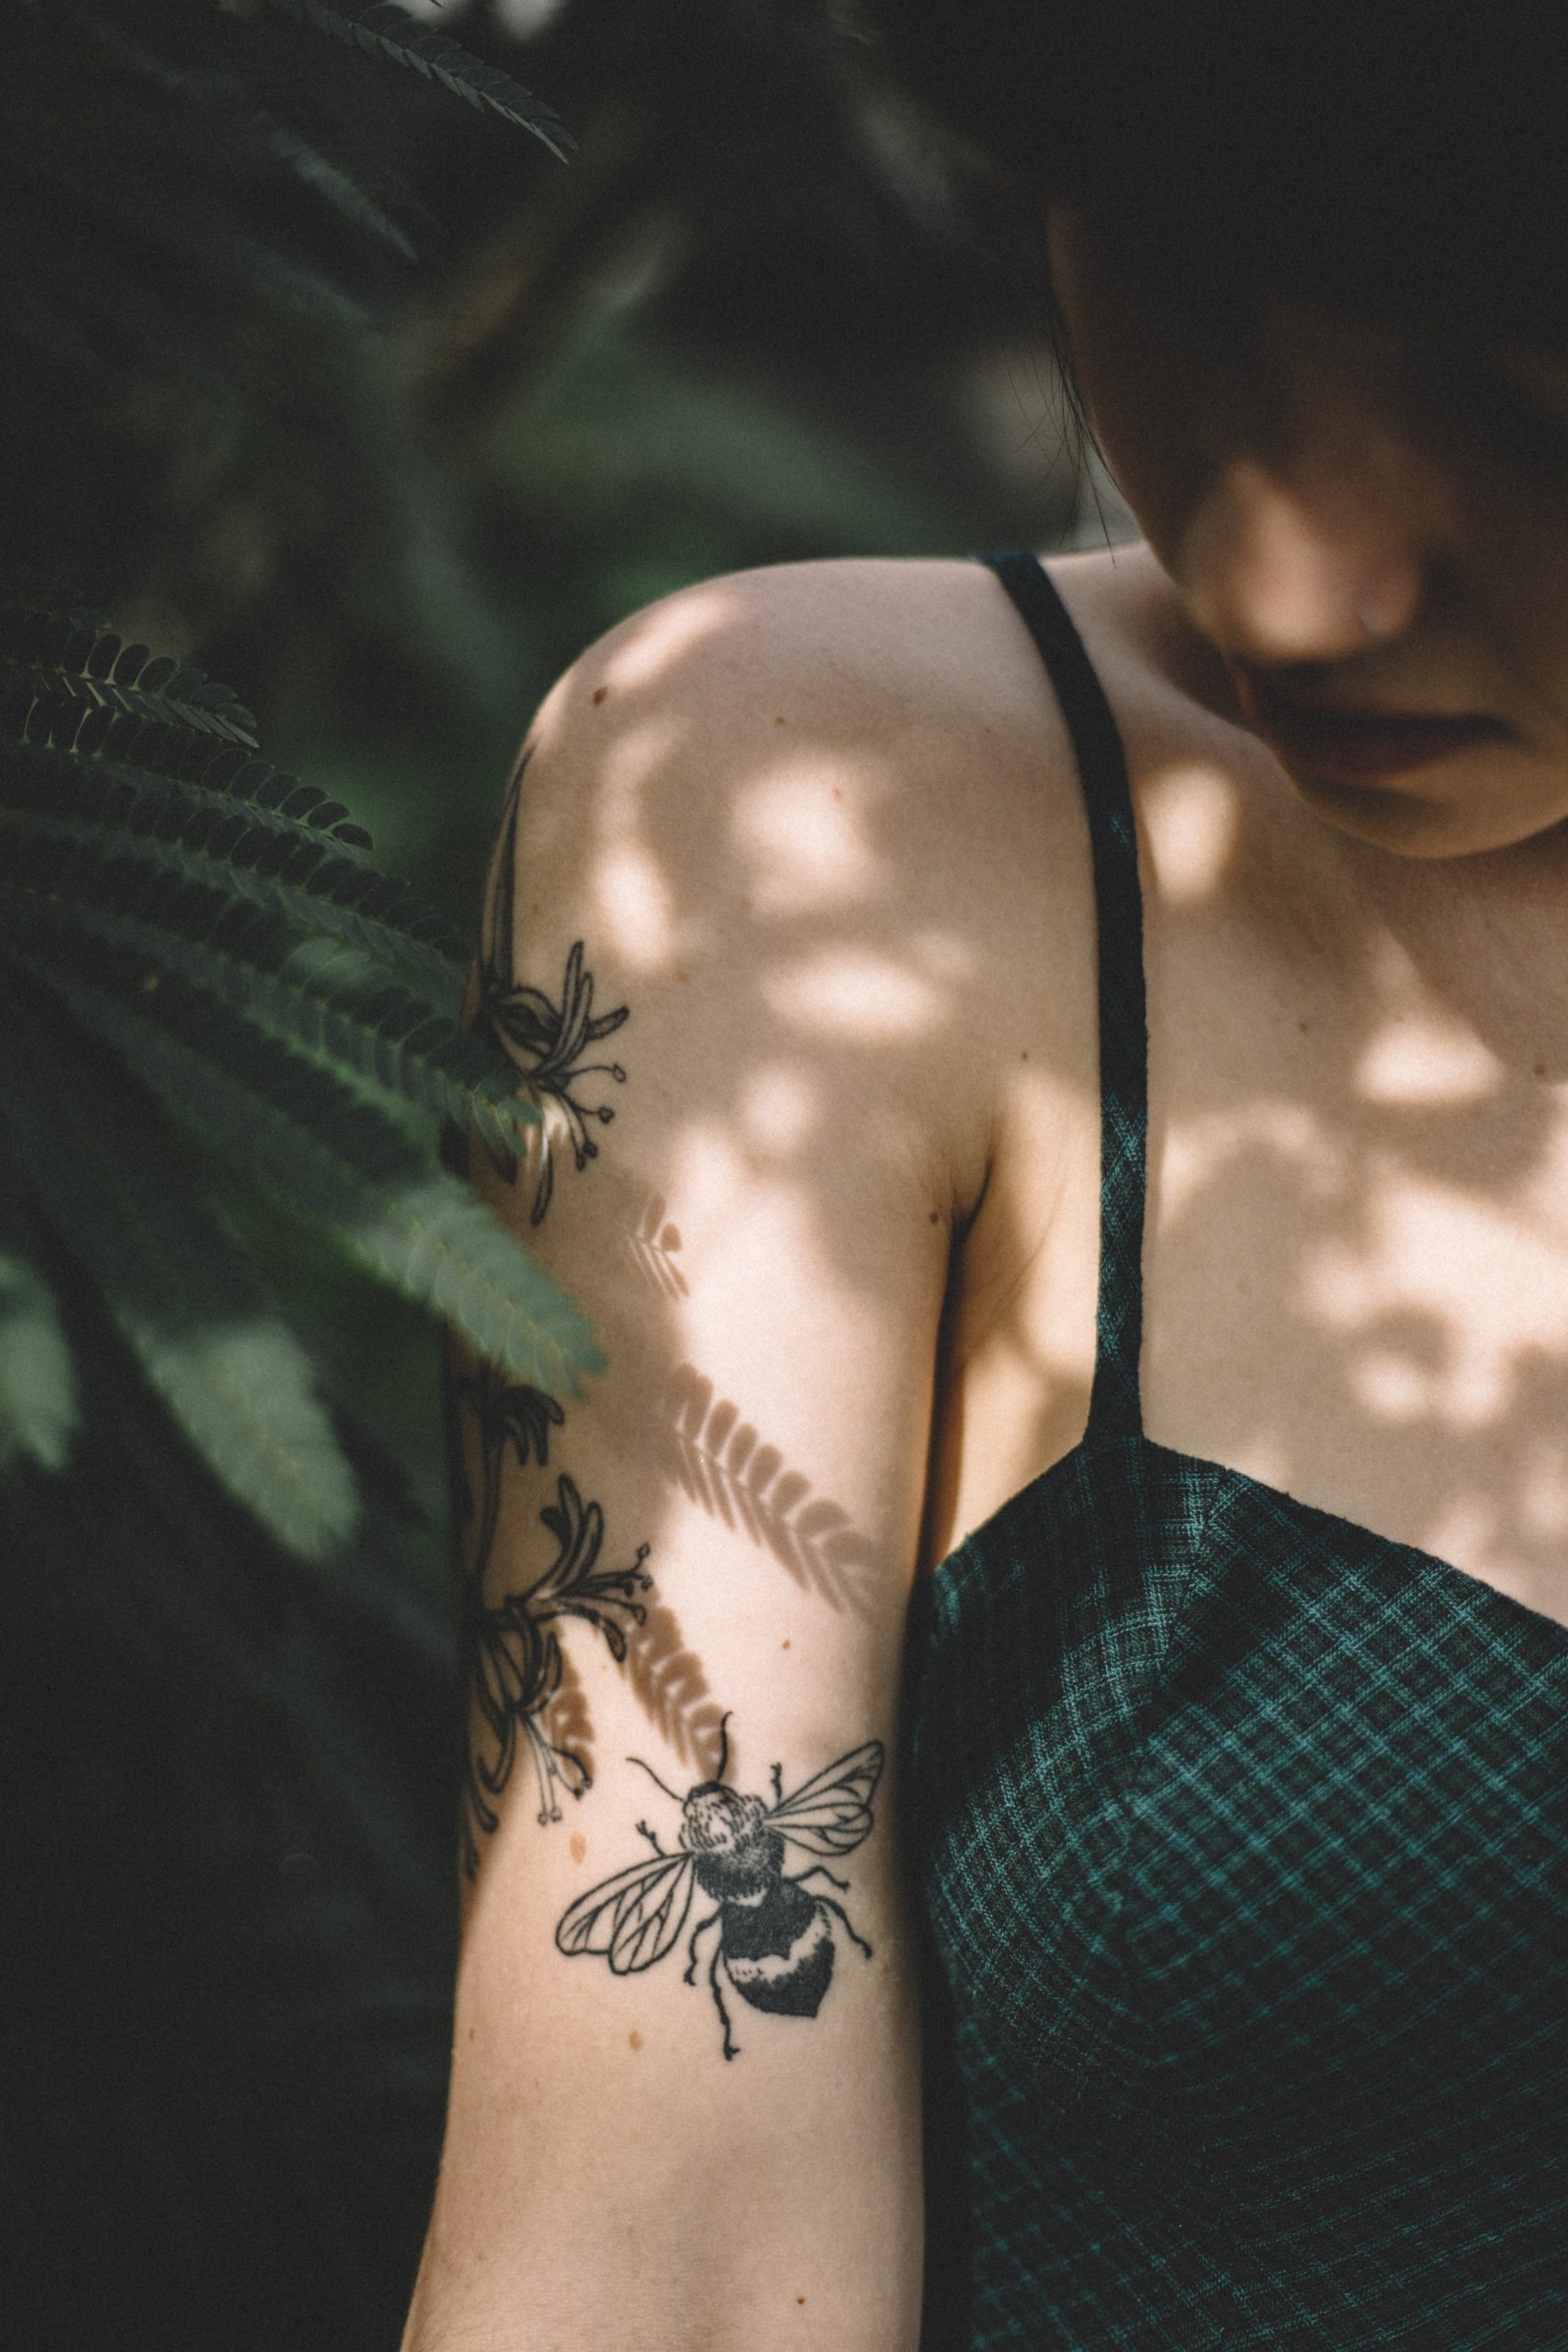 7 Rules to Follow After Getting a Tattoo